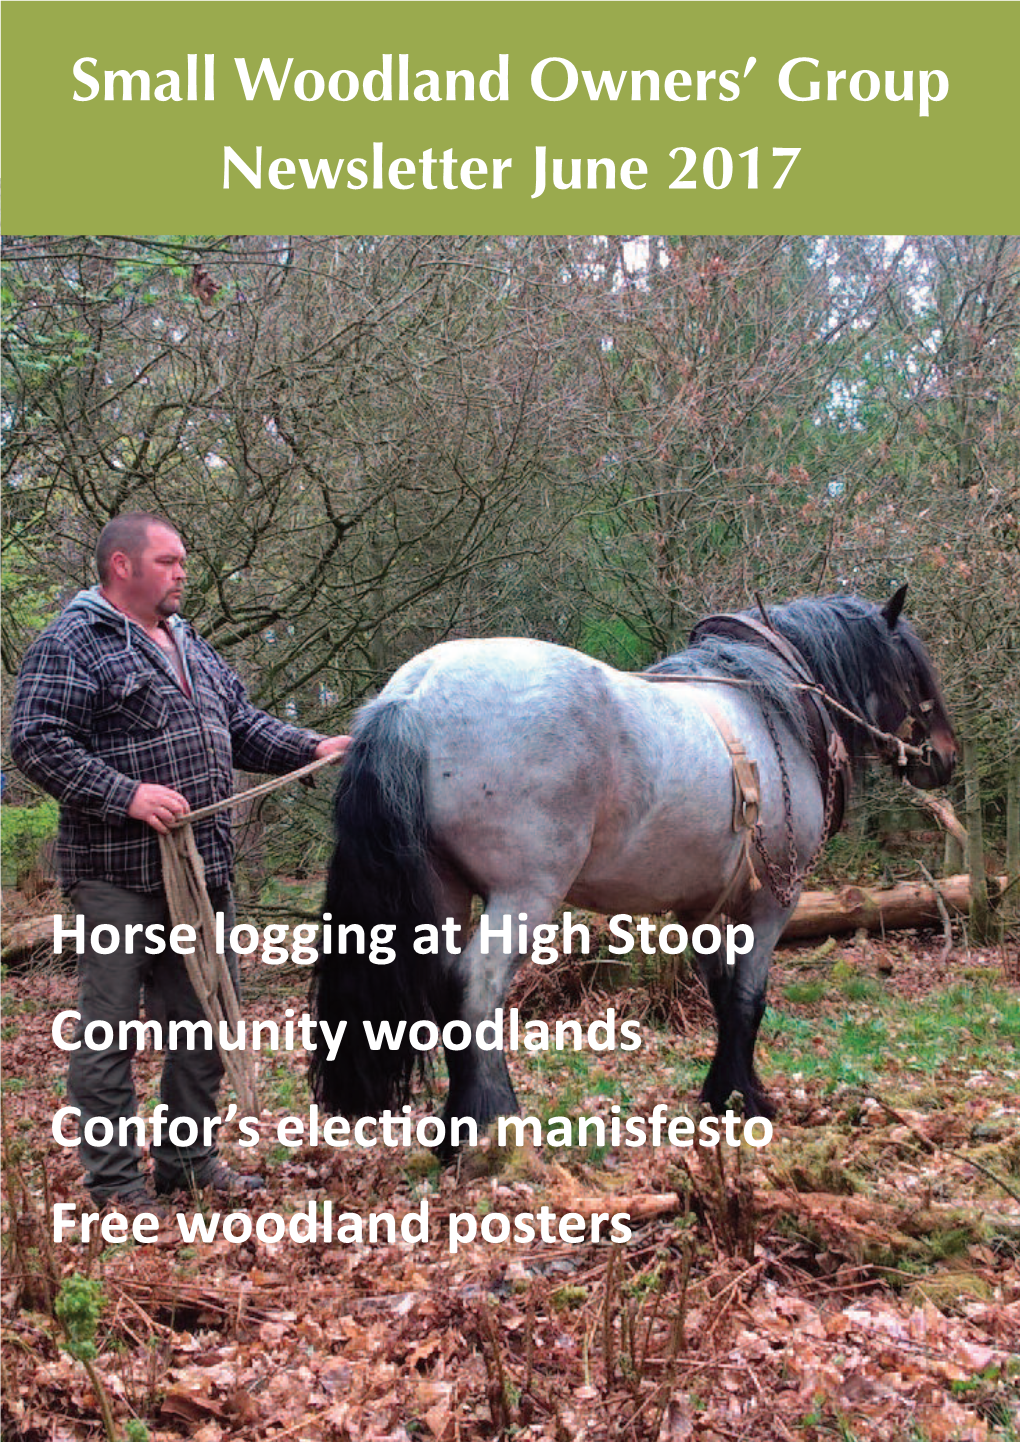 Small Woodland Owners' Group Horse Logging at High Stoop